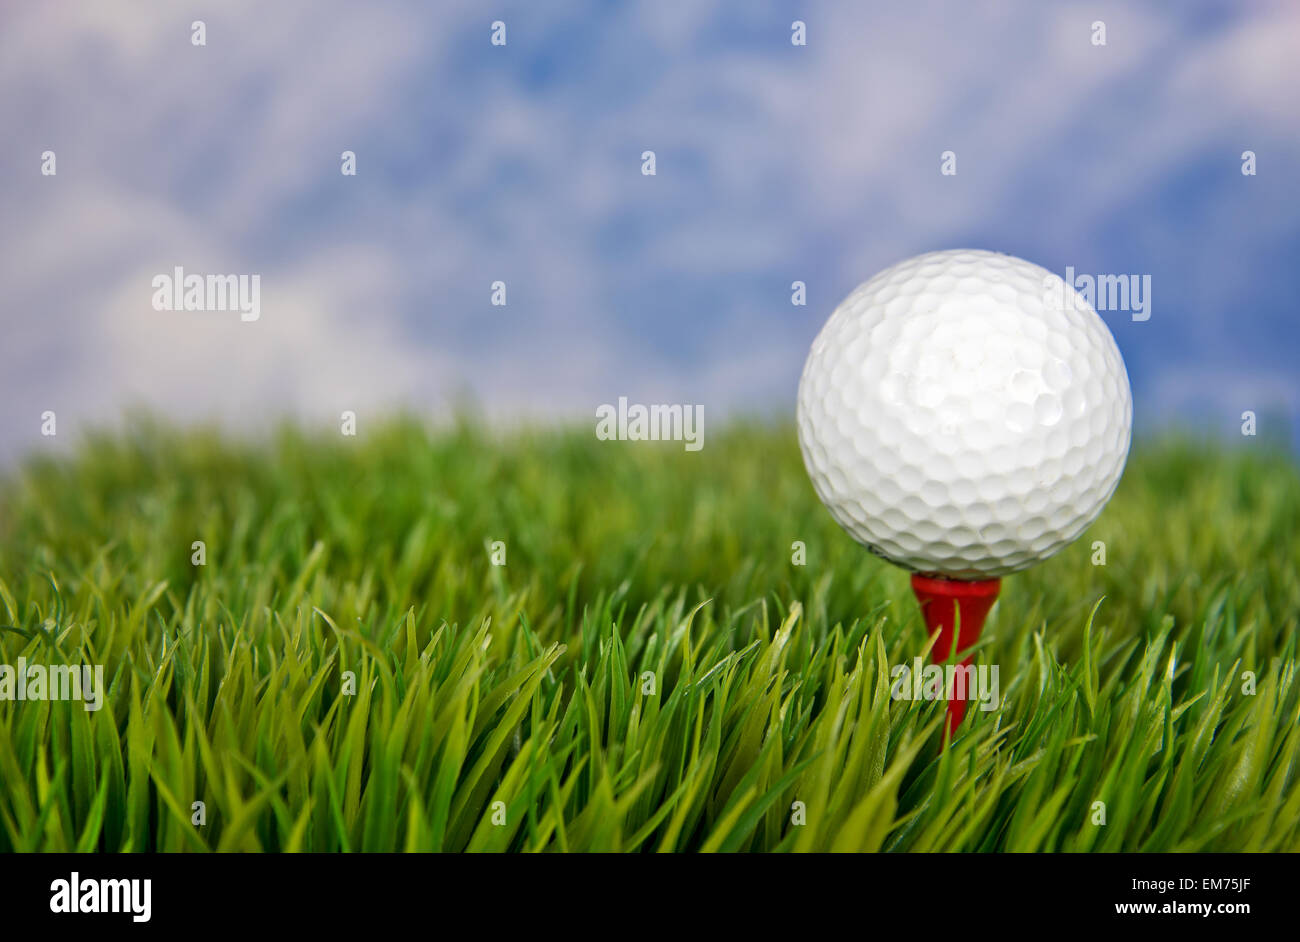 Close up of a white golf ball on a red tee in grass. Stock Photo